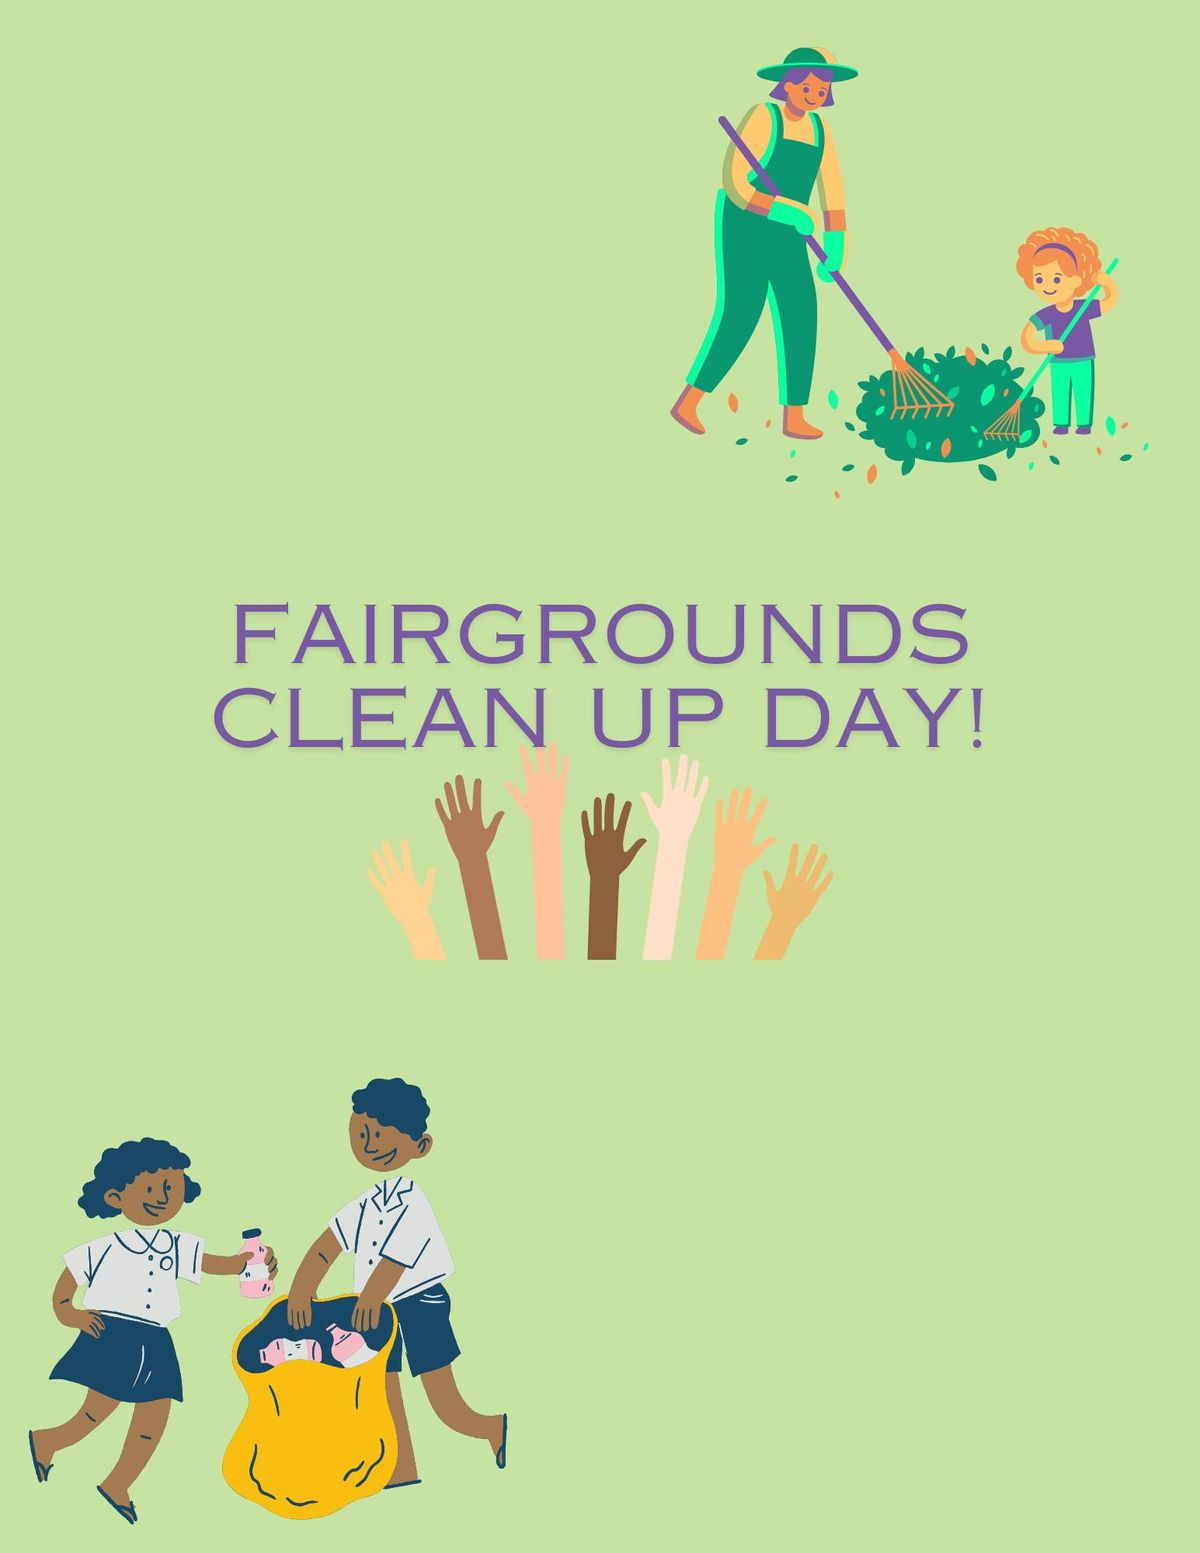 Fairgrounds Clean Up Day